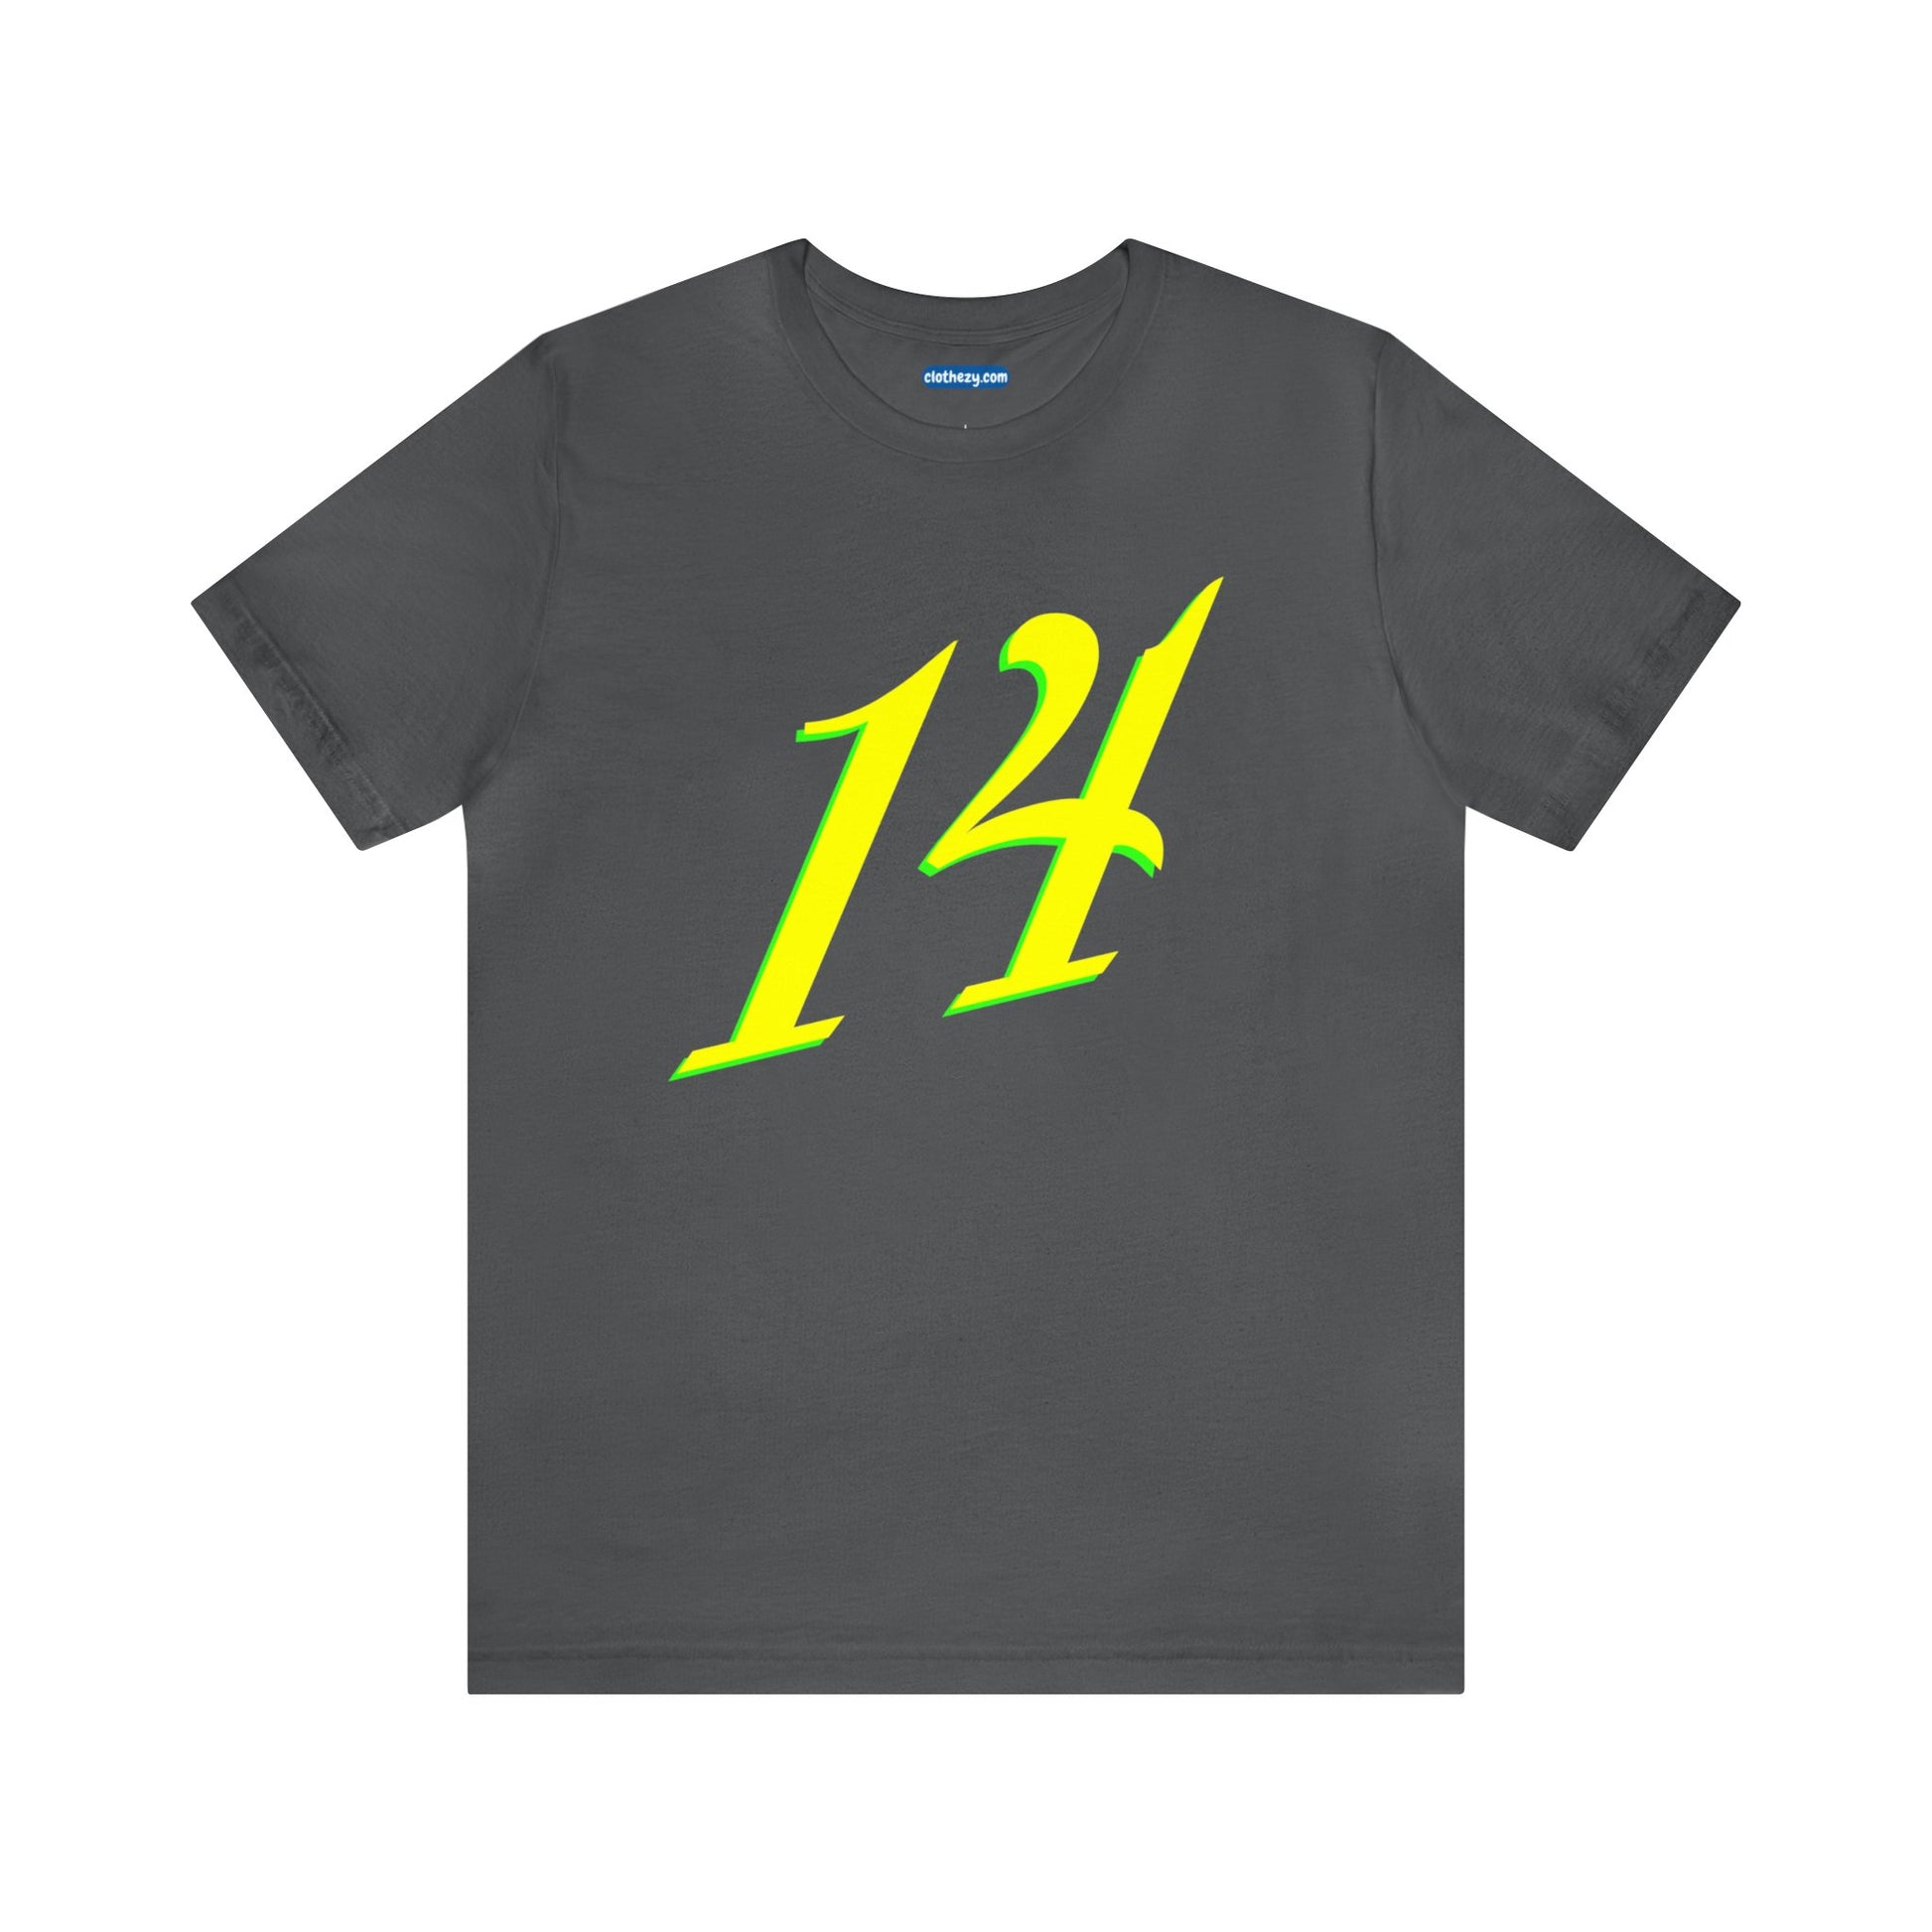 Number 14 Design - Soft Cotton Tee for birthdays and celebrations, Gift for friends and family, Multiple Options by clothezy.com in Black Size Small - Buy Now